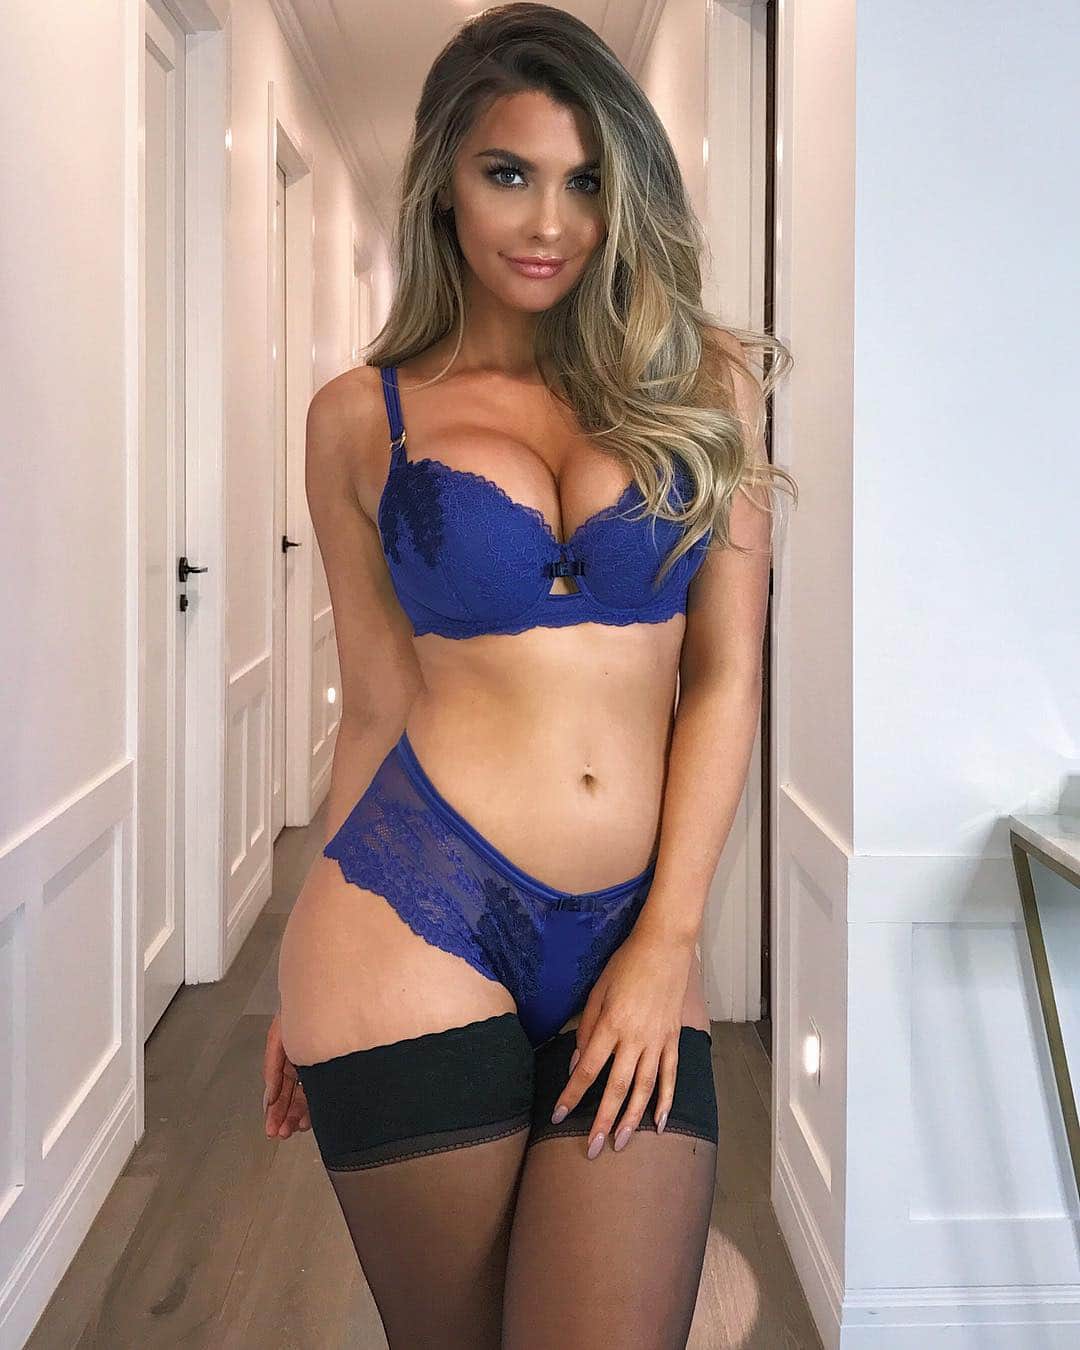 brian horman recommends emily sears patreon pic